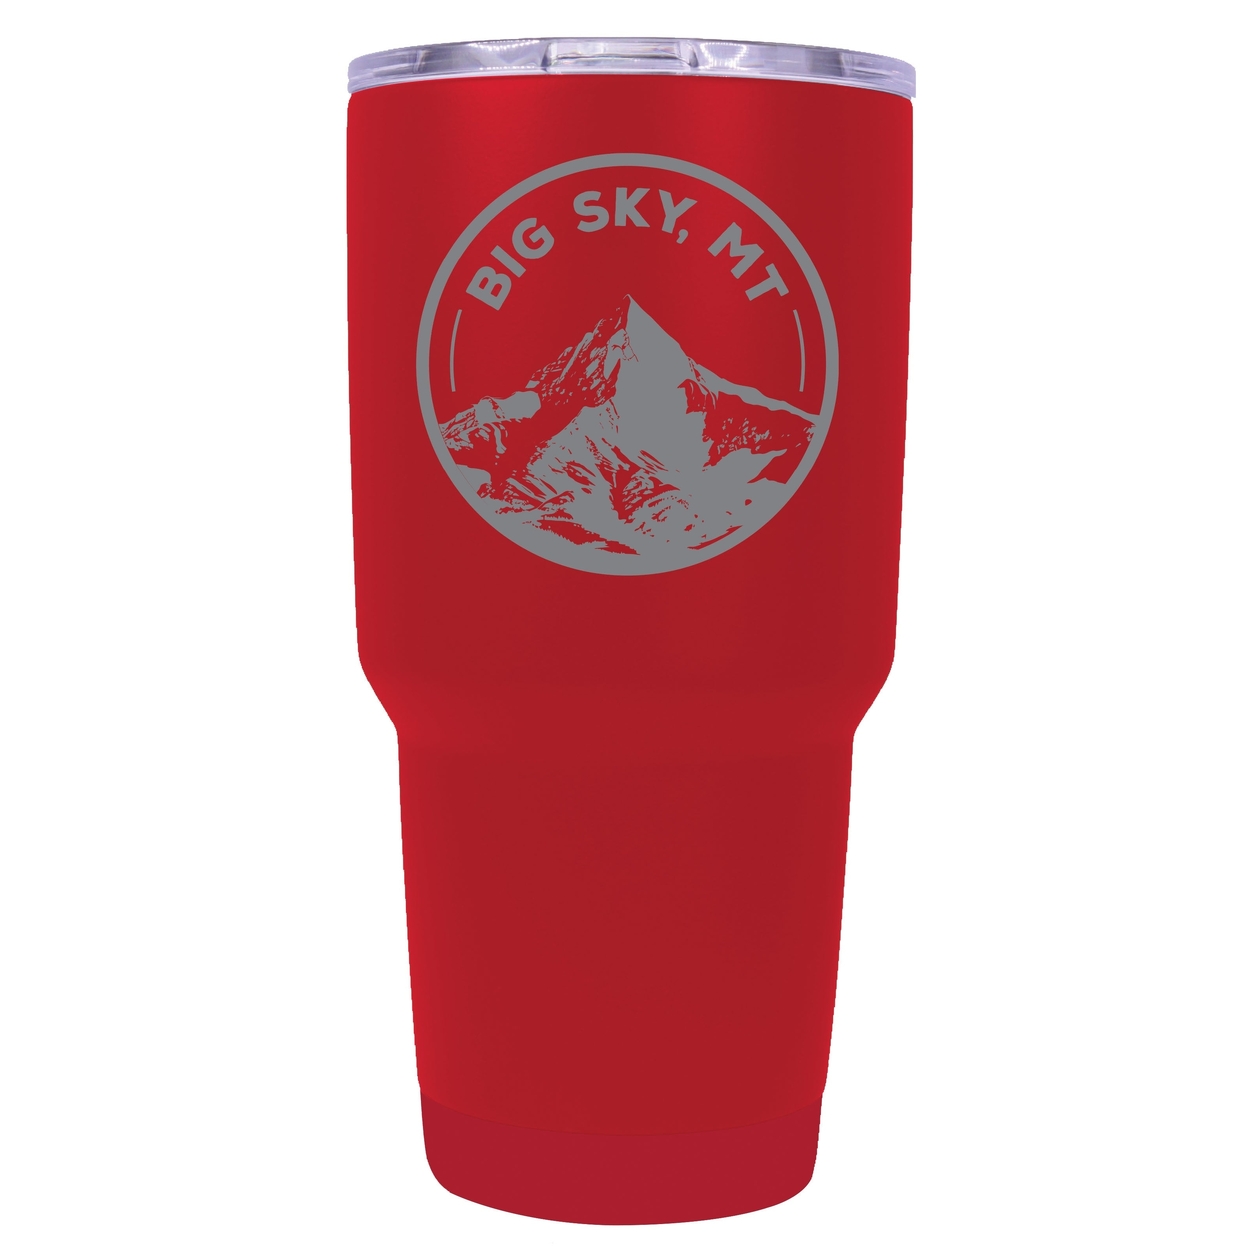 Big Sky Montana Souvenir 24 Oz Engraved Insulated Stainless Steel Tumbler - White,,2-Pack